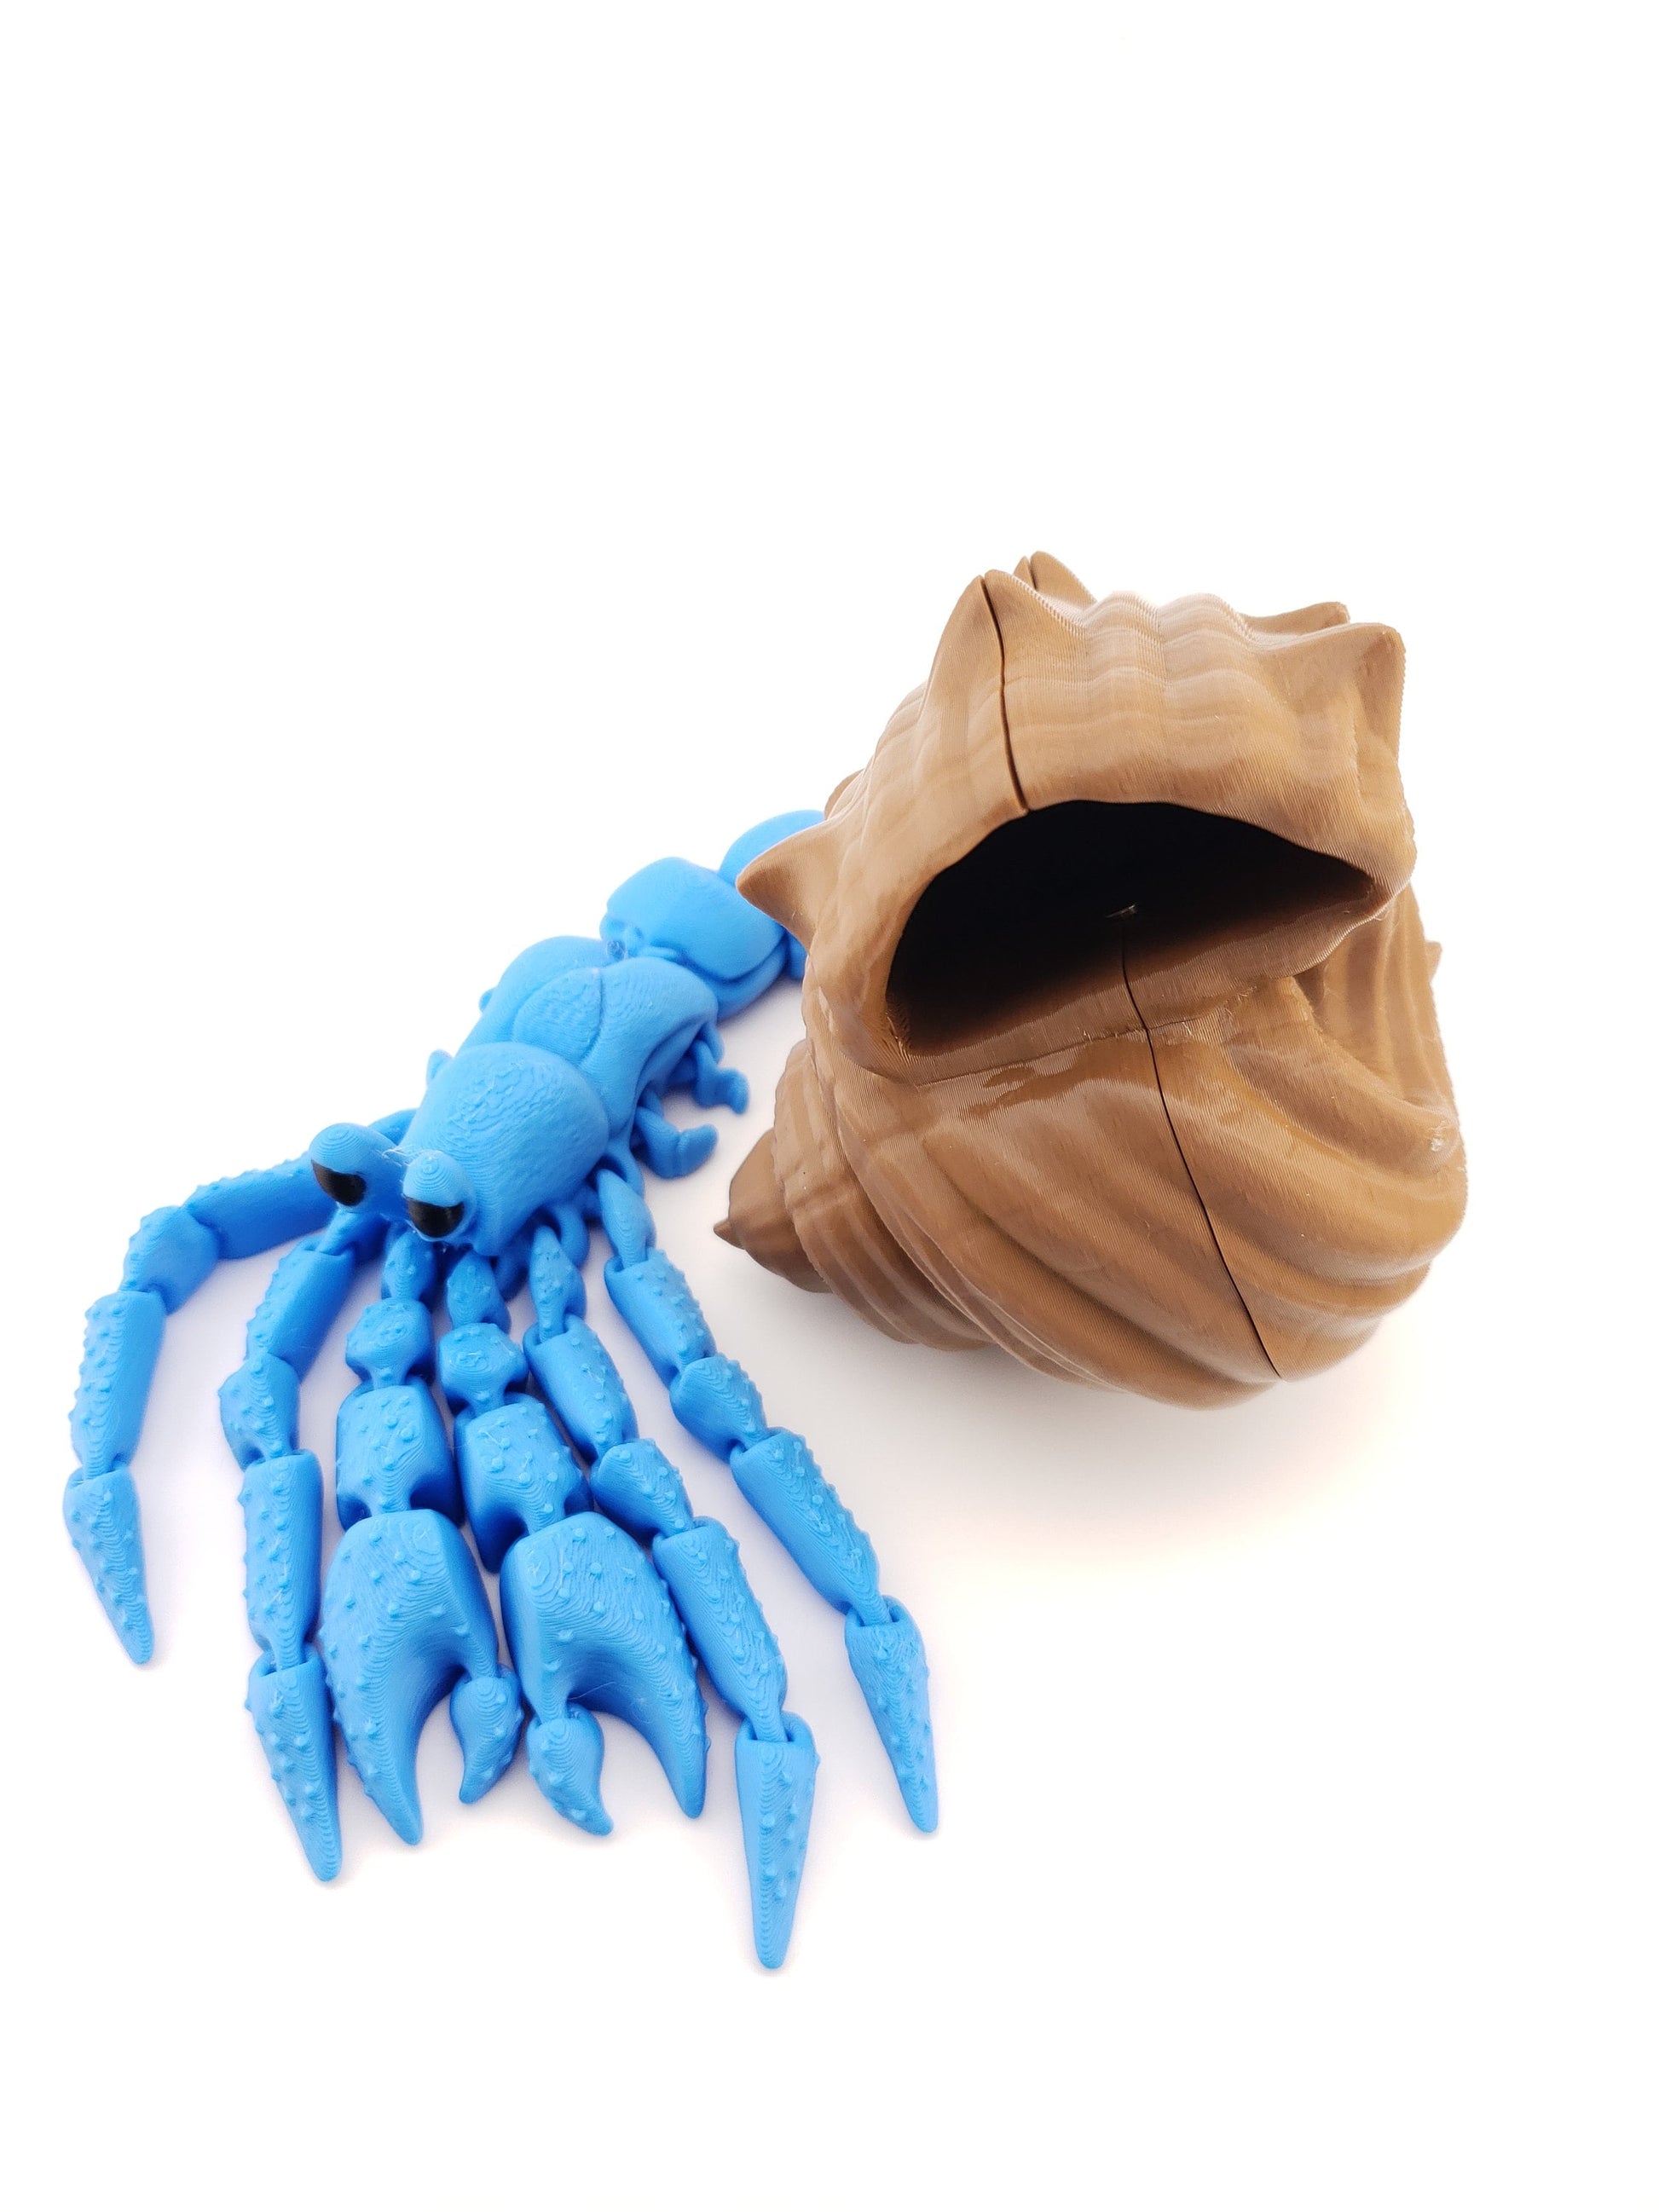 1 Articulated Hermit Crab -- Decor Gift - 3D Printed Fidget Fantasy Creature - Customizable Colors - Authorized Seller